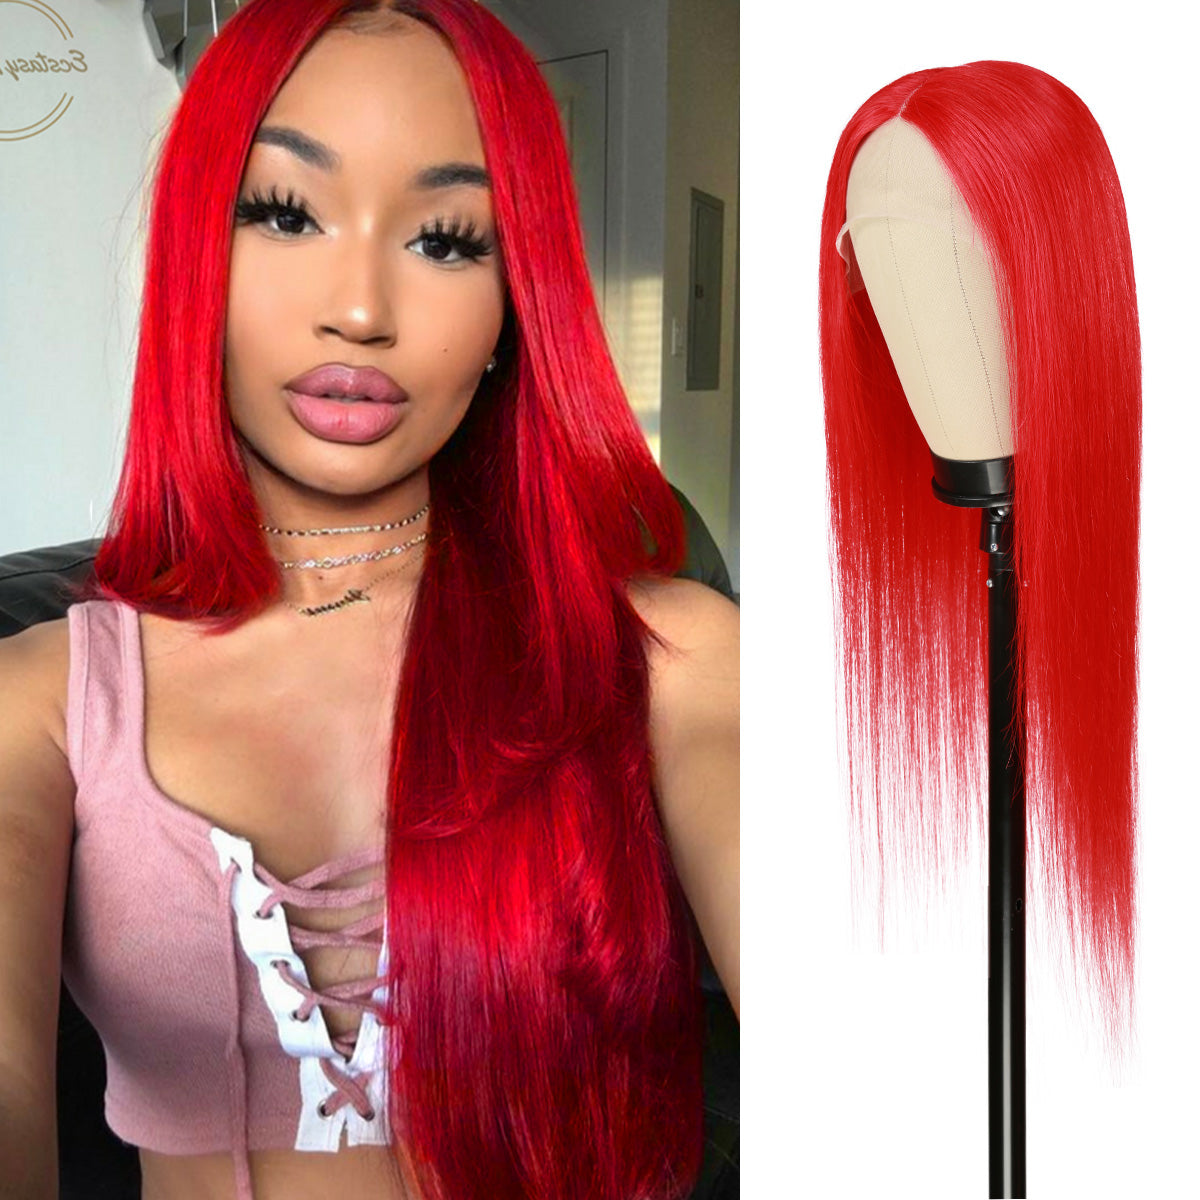 The T part wig is one of the most affordable wig types, We don't need to spend much time customizing the hairline and parting space, Silky smooth texture, Light weight, Natural Looking, The wig comes ready to use, The red color you always rocking with, The classic of Fancy color